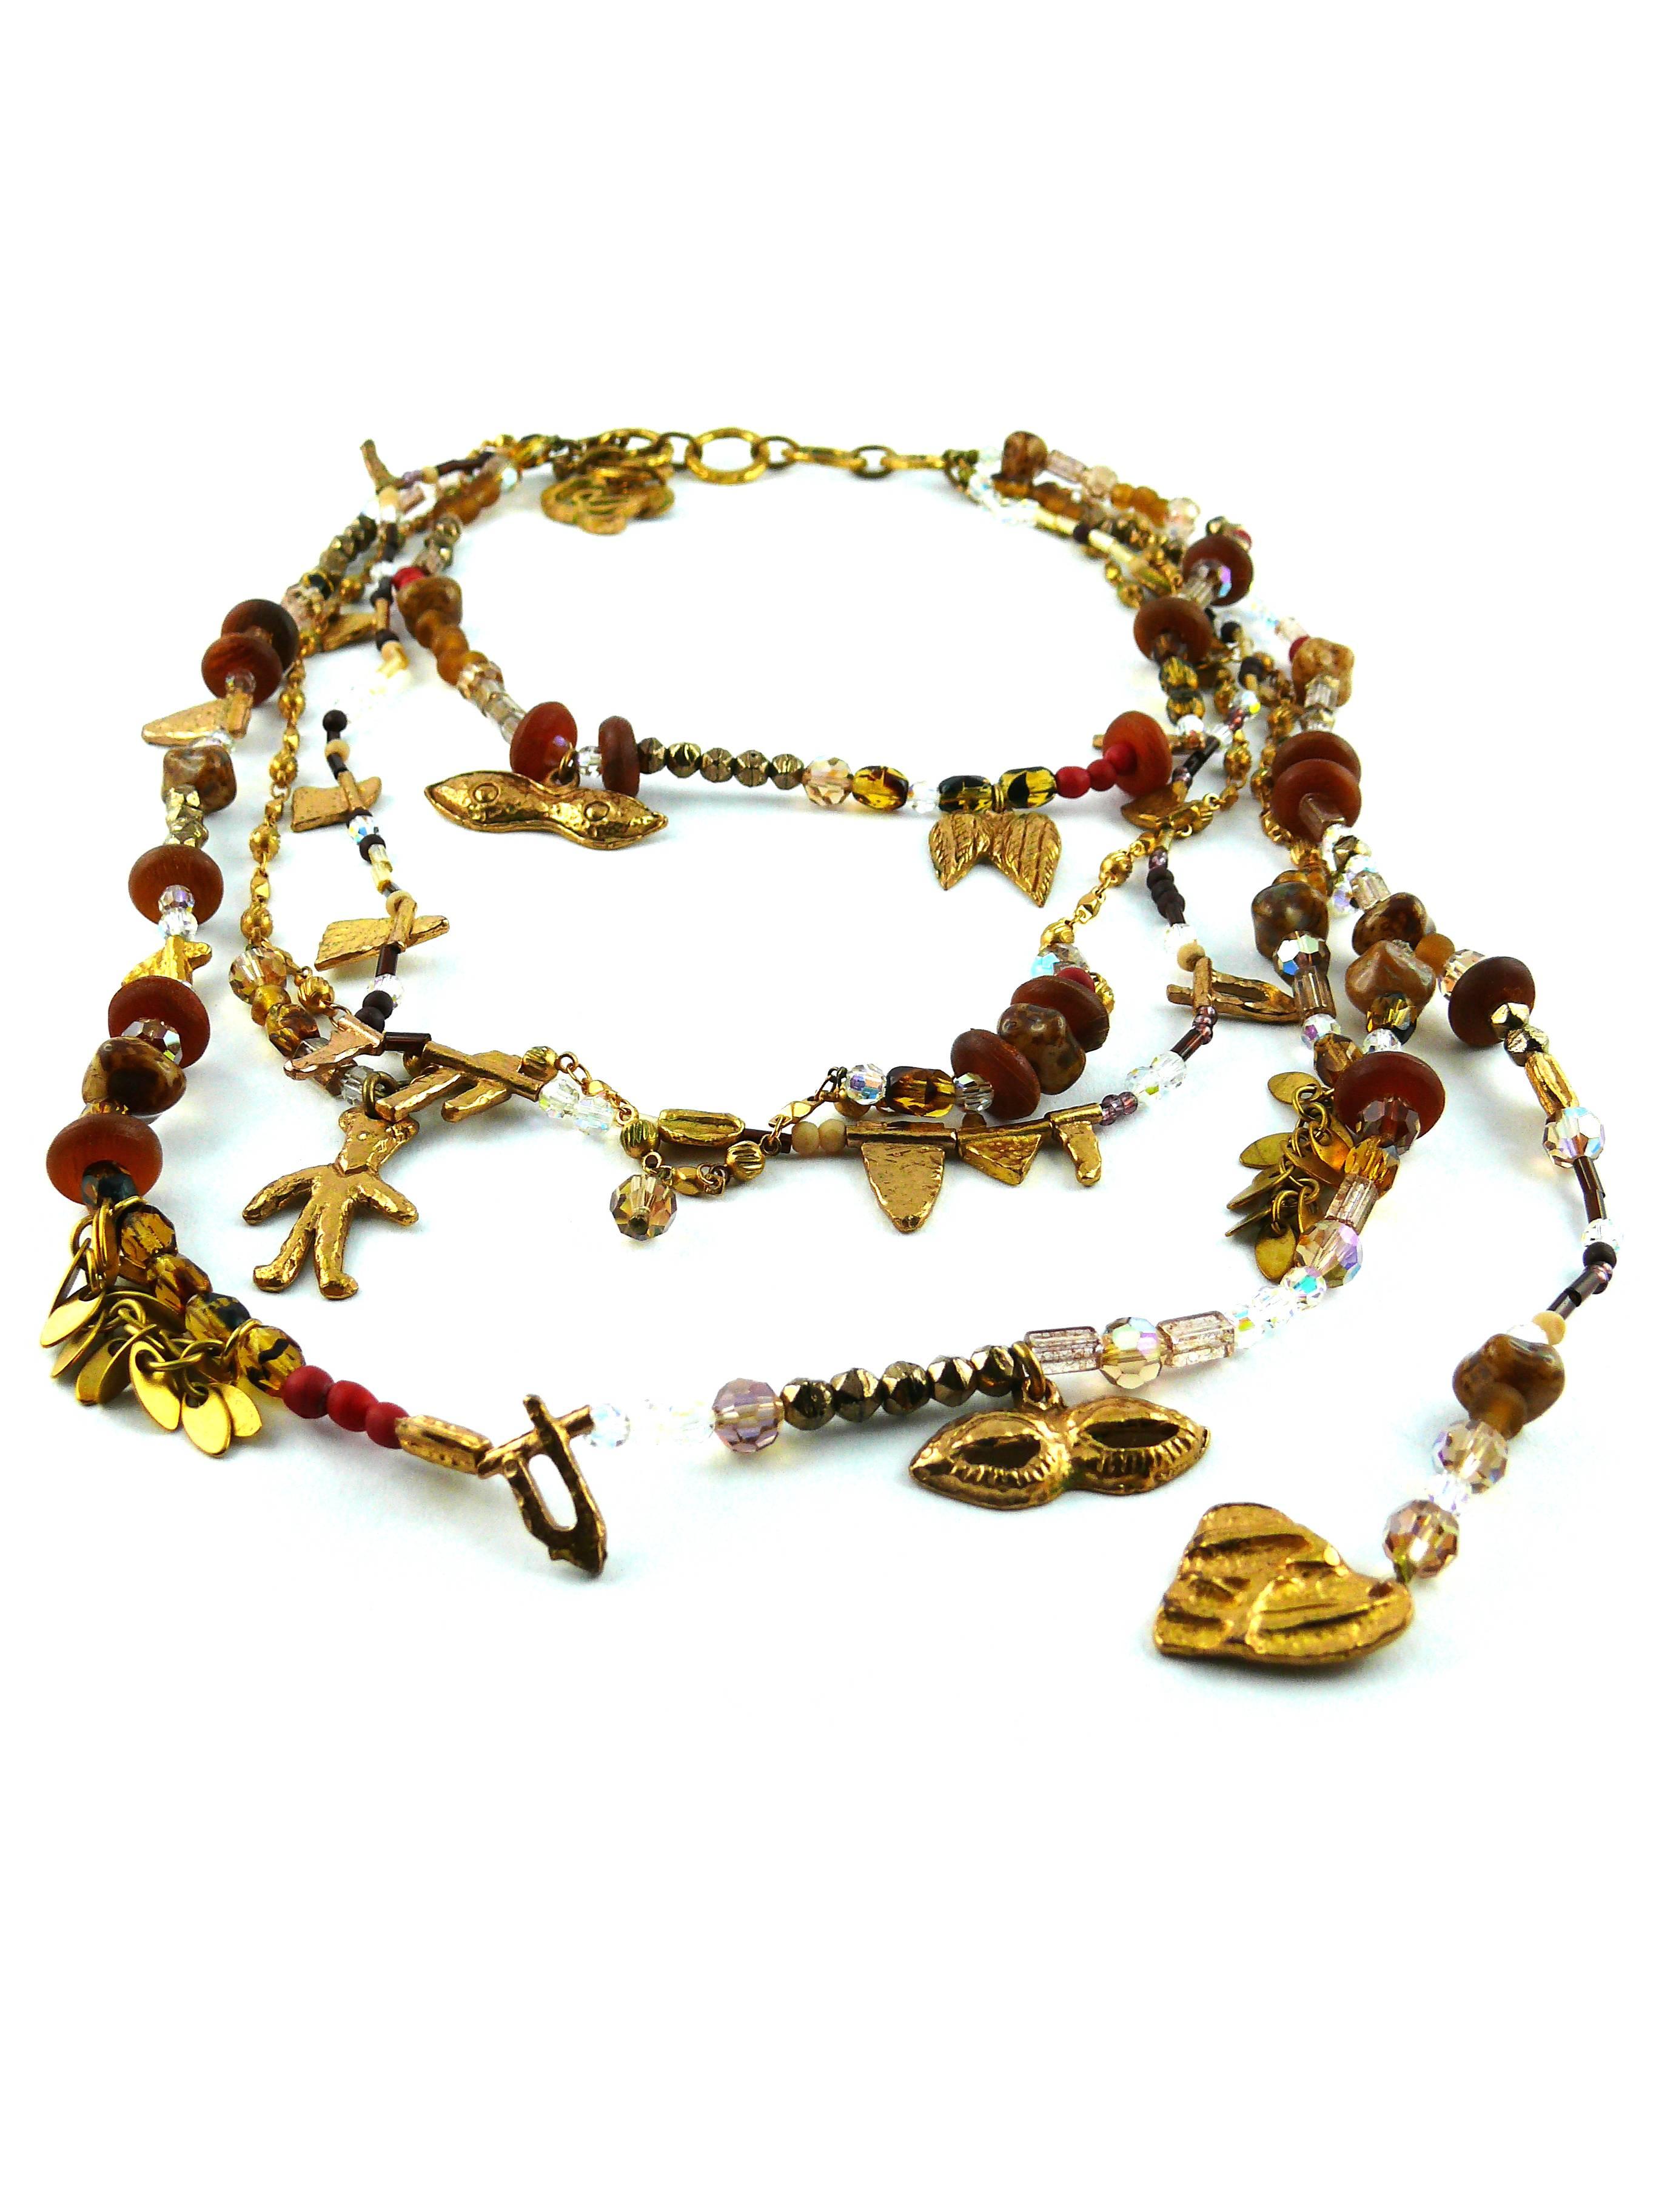 CHRISTIAN LACROIX vintage multi strand voodoo style necklace.

Beaded chains embellished with gold tone abstract forms and charms (masks, figure, heart, wings).

Marked Christian Lacroix CL Made in France.

Comes with its original